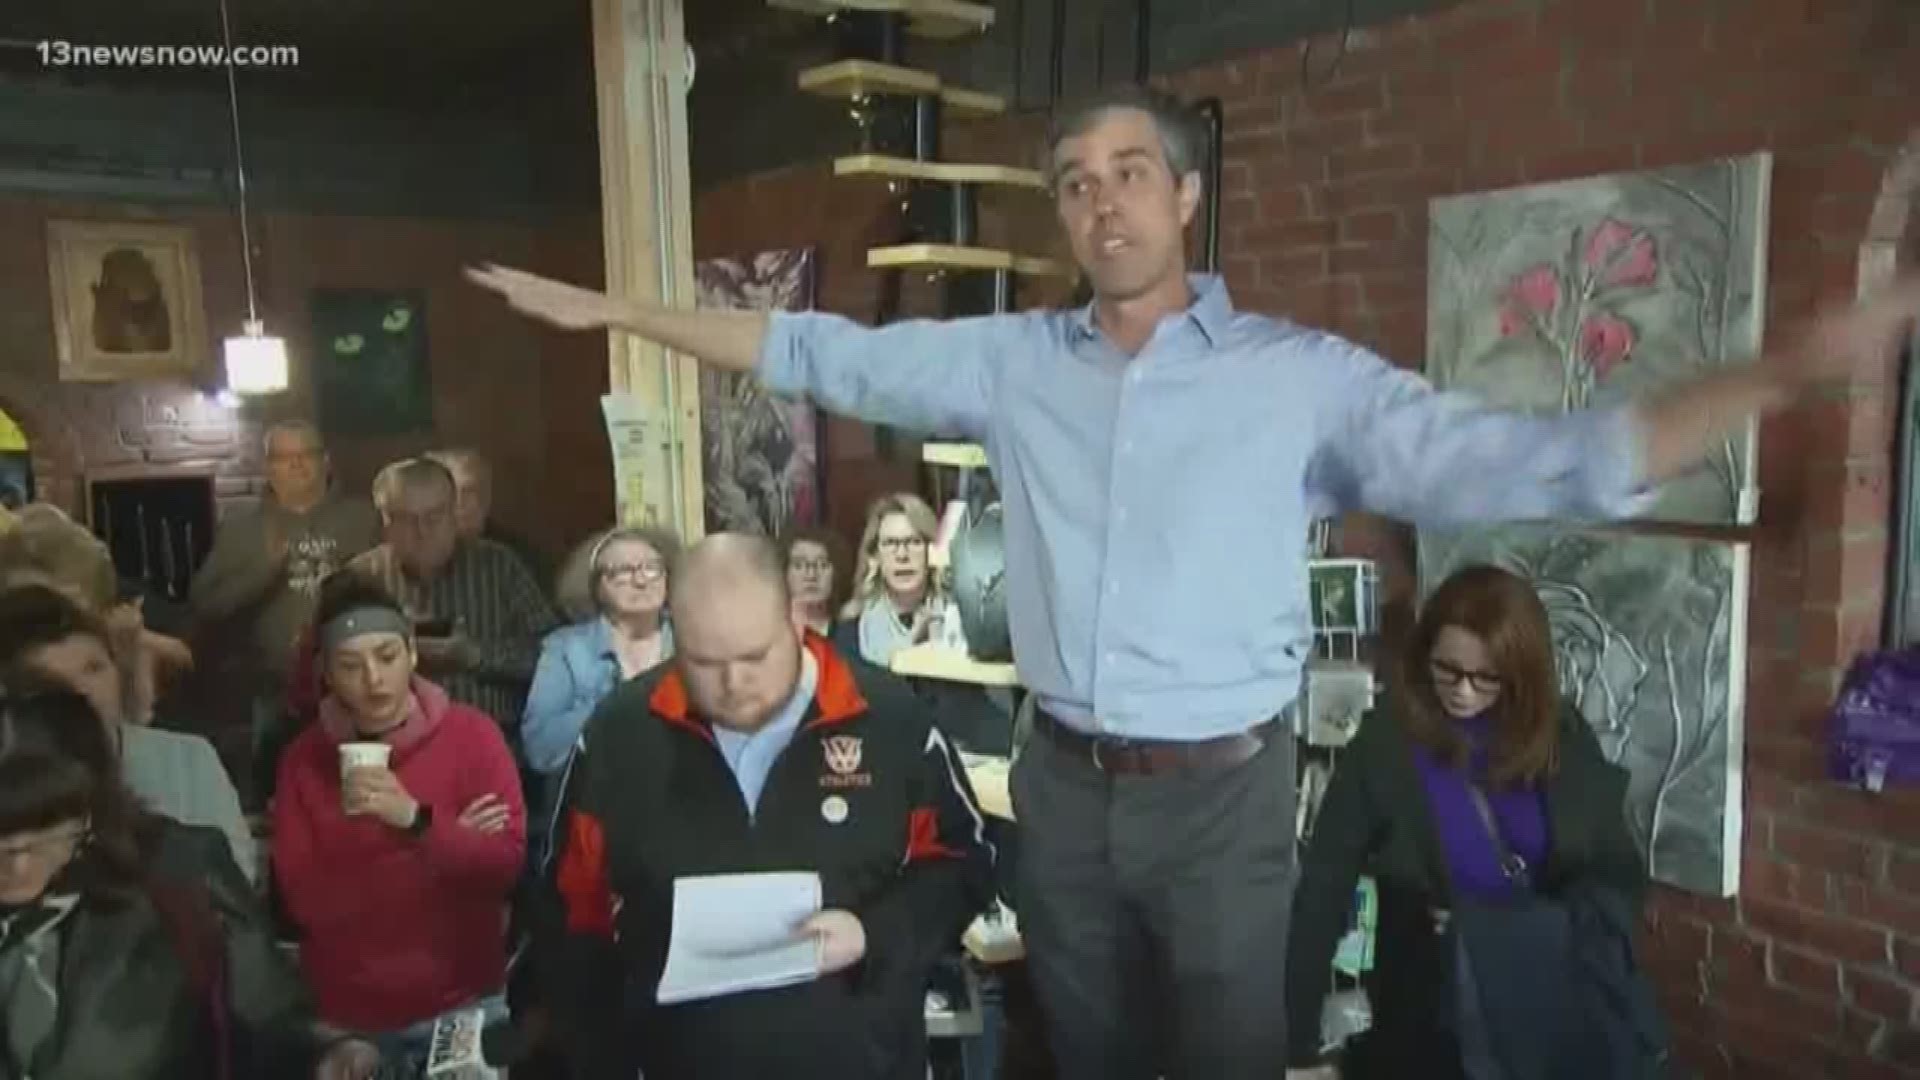 As the road to the 2020 election begins, Beto O'Rourke is planning his campaign stops and some of them are in Hampton Roads.